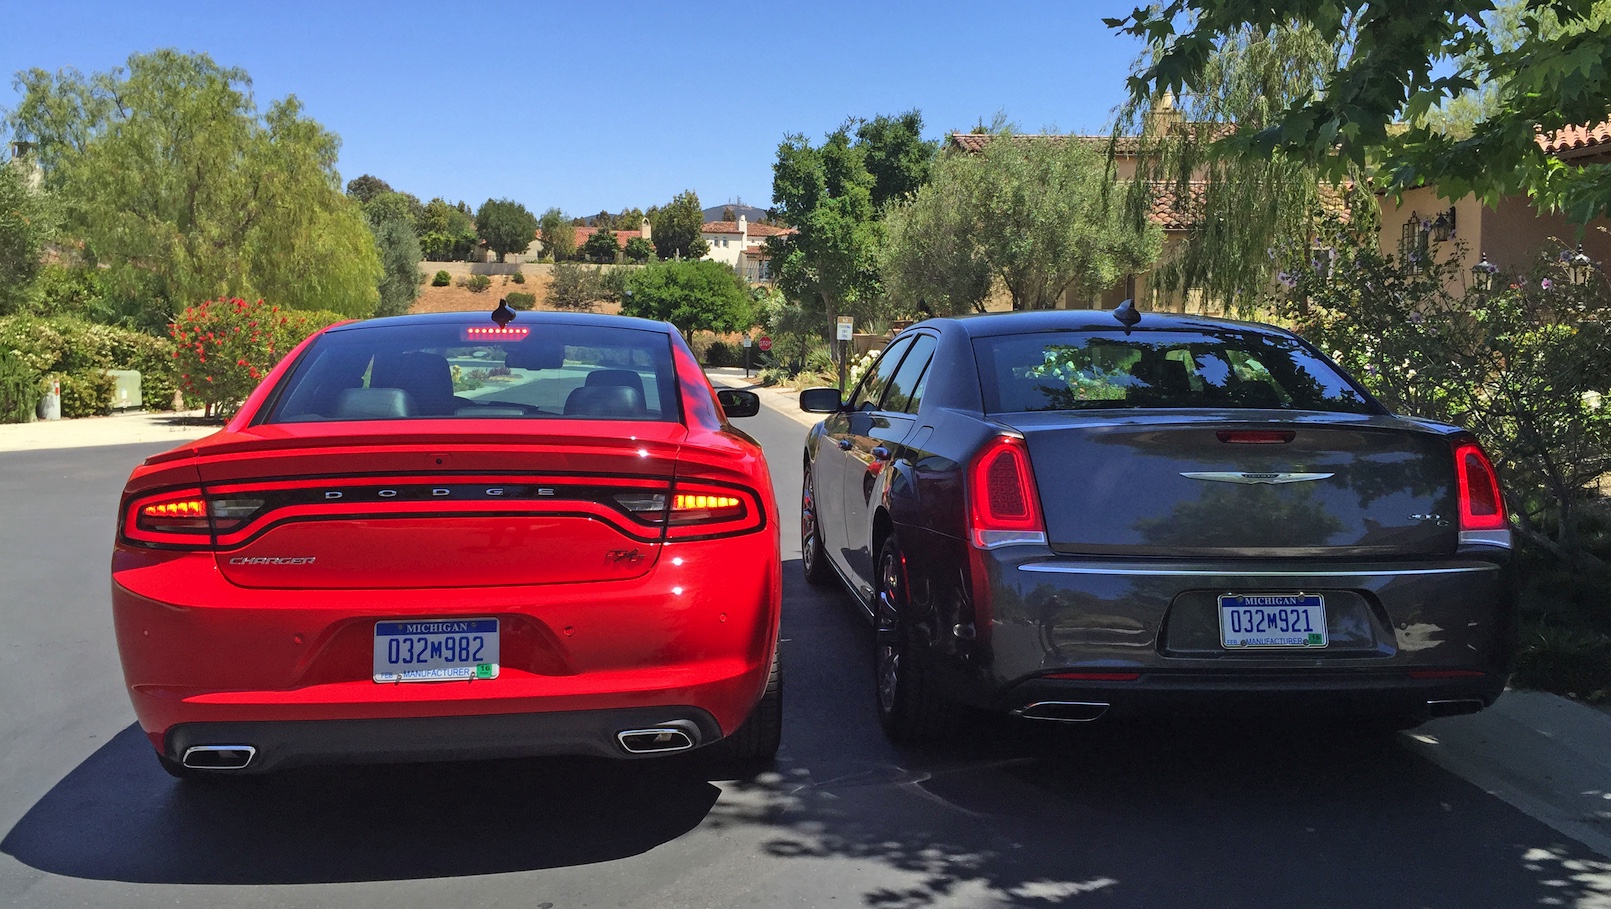 Car Wars Chrysler 300c Vs Dodge Charger Which Car Has The Better